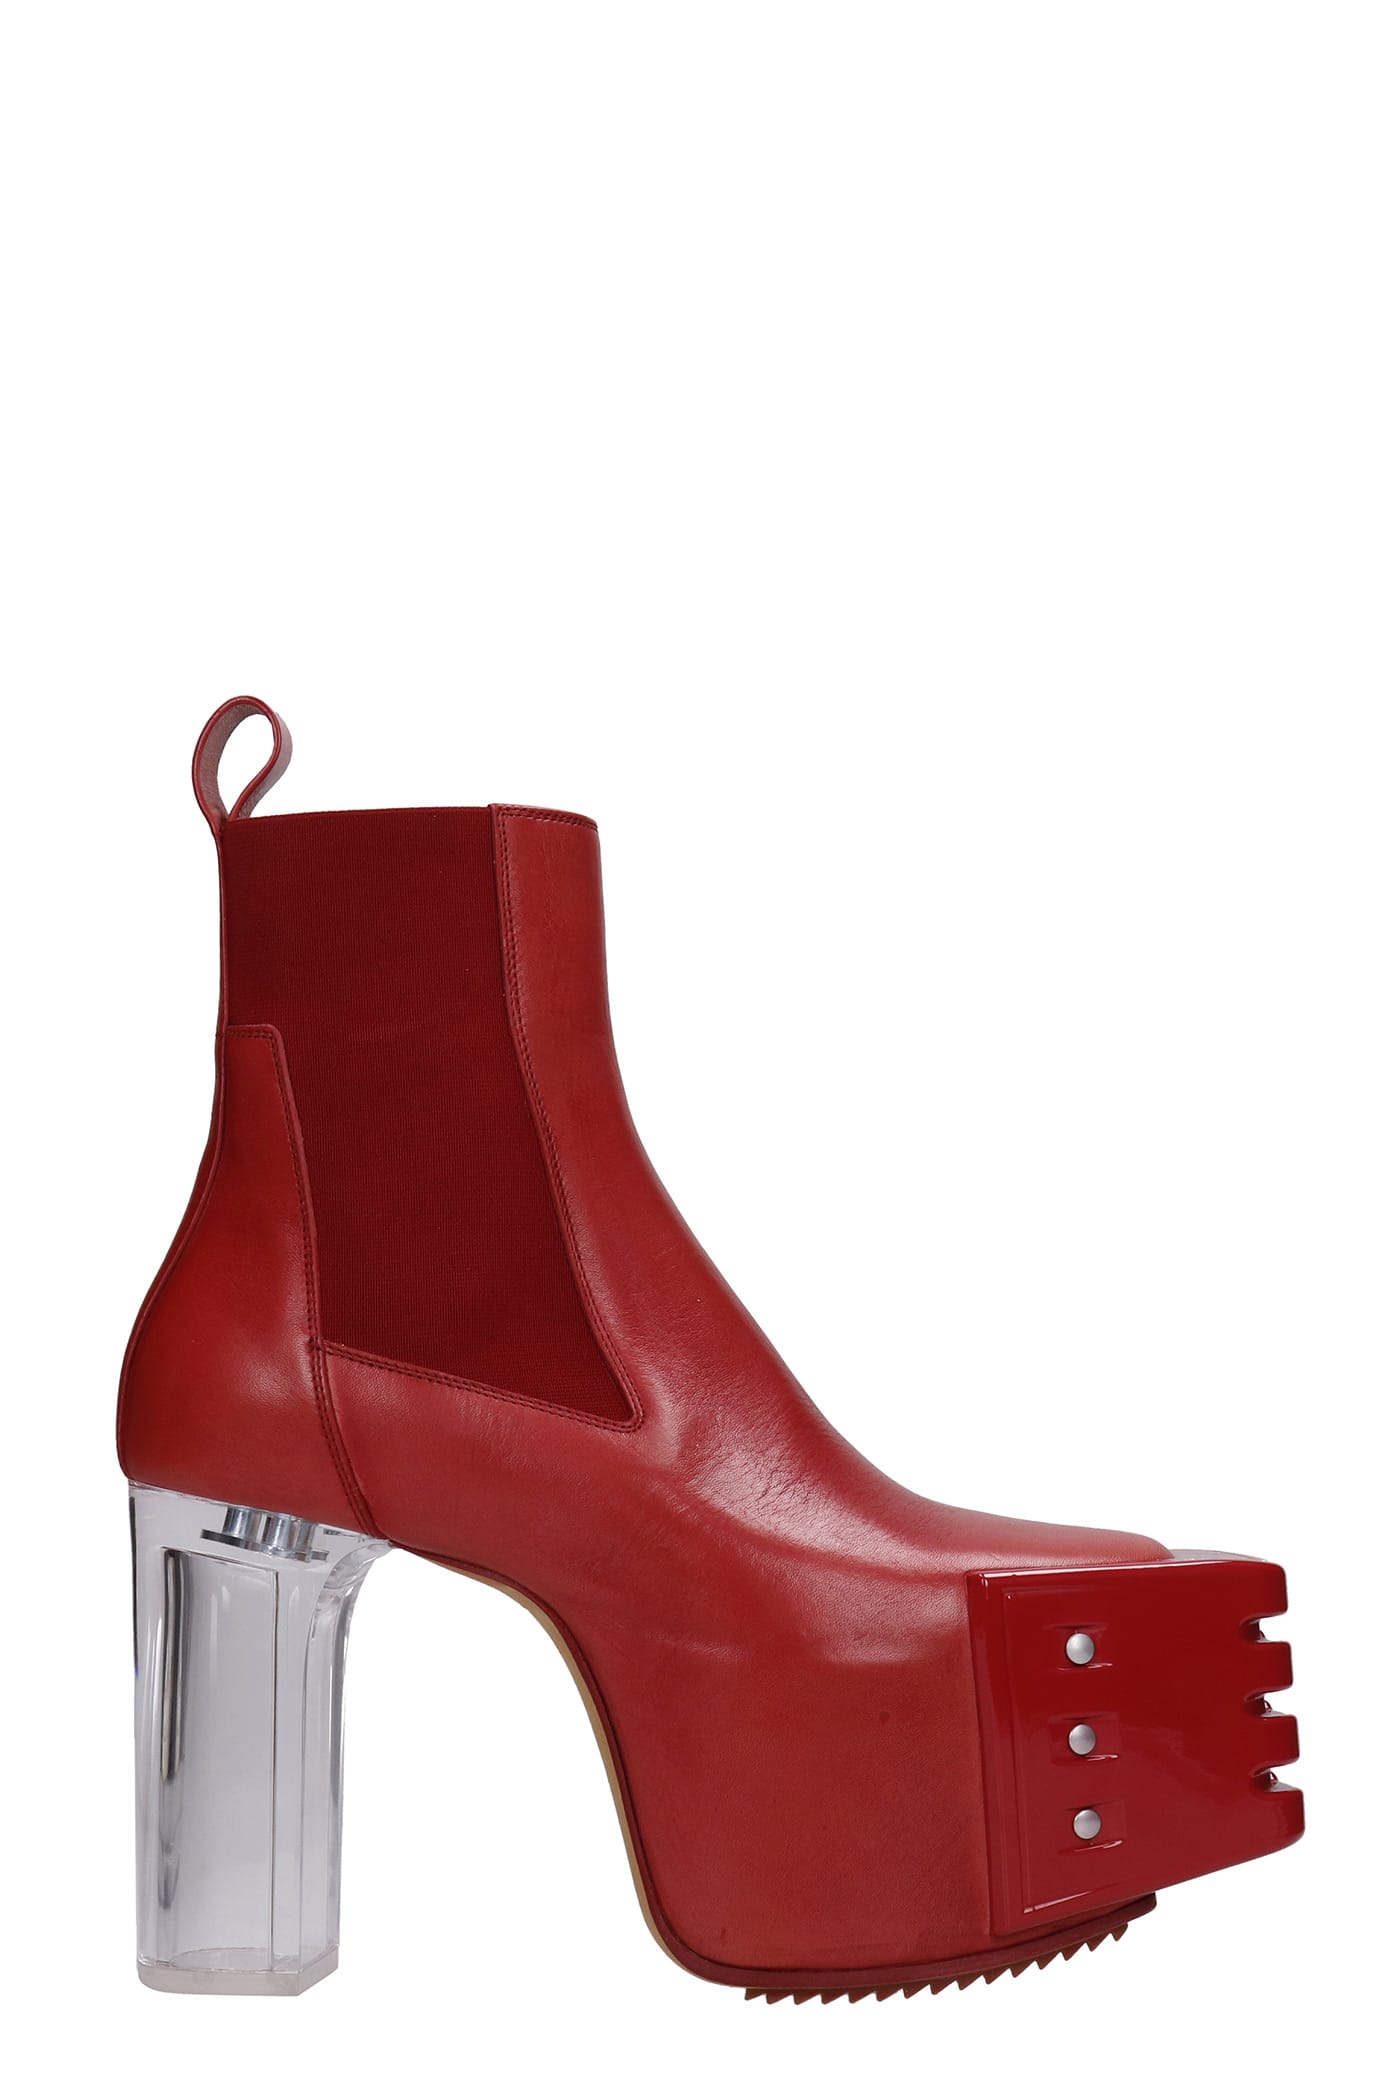 Rick Owens Grilled Platform High Heels Ankle Boots In Red Leather